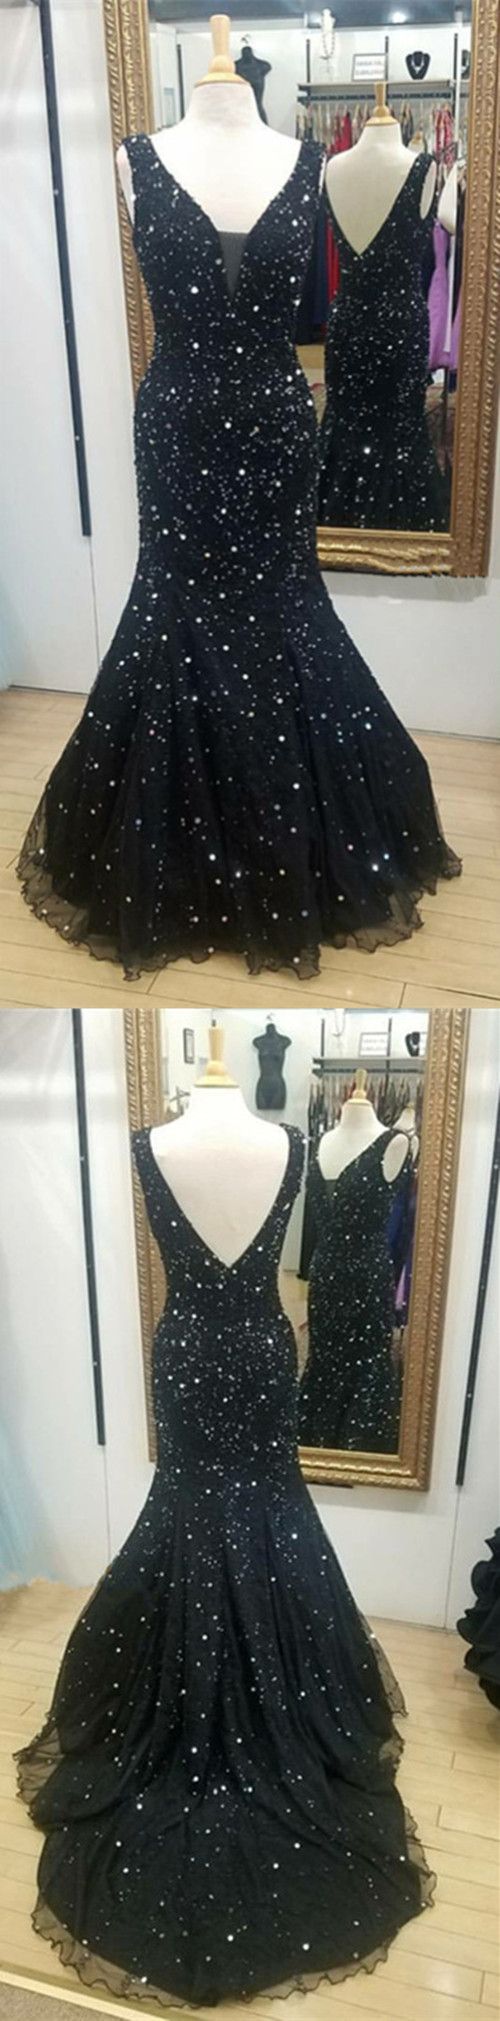 Luxurious Sequins Beaded V Neck Navy Blue Prom Dresses Sparkly Mermaid Evening Gowns,p1039